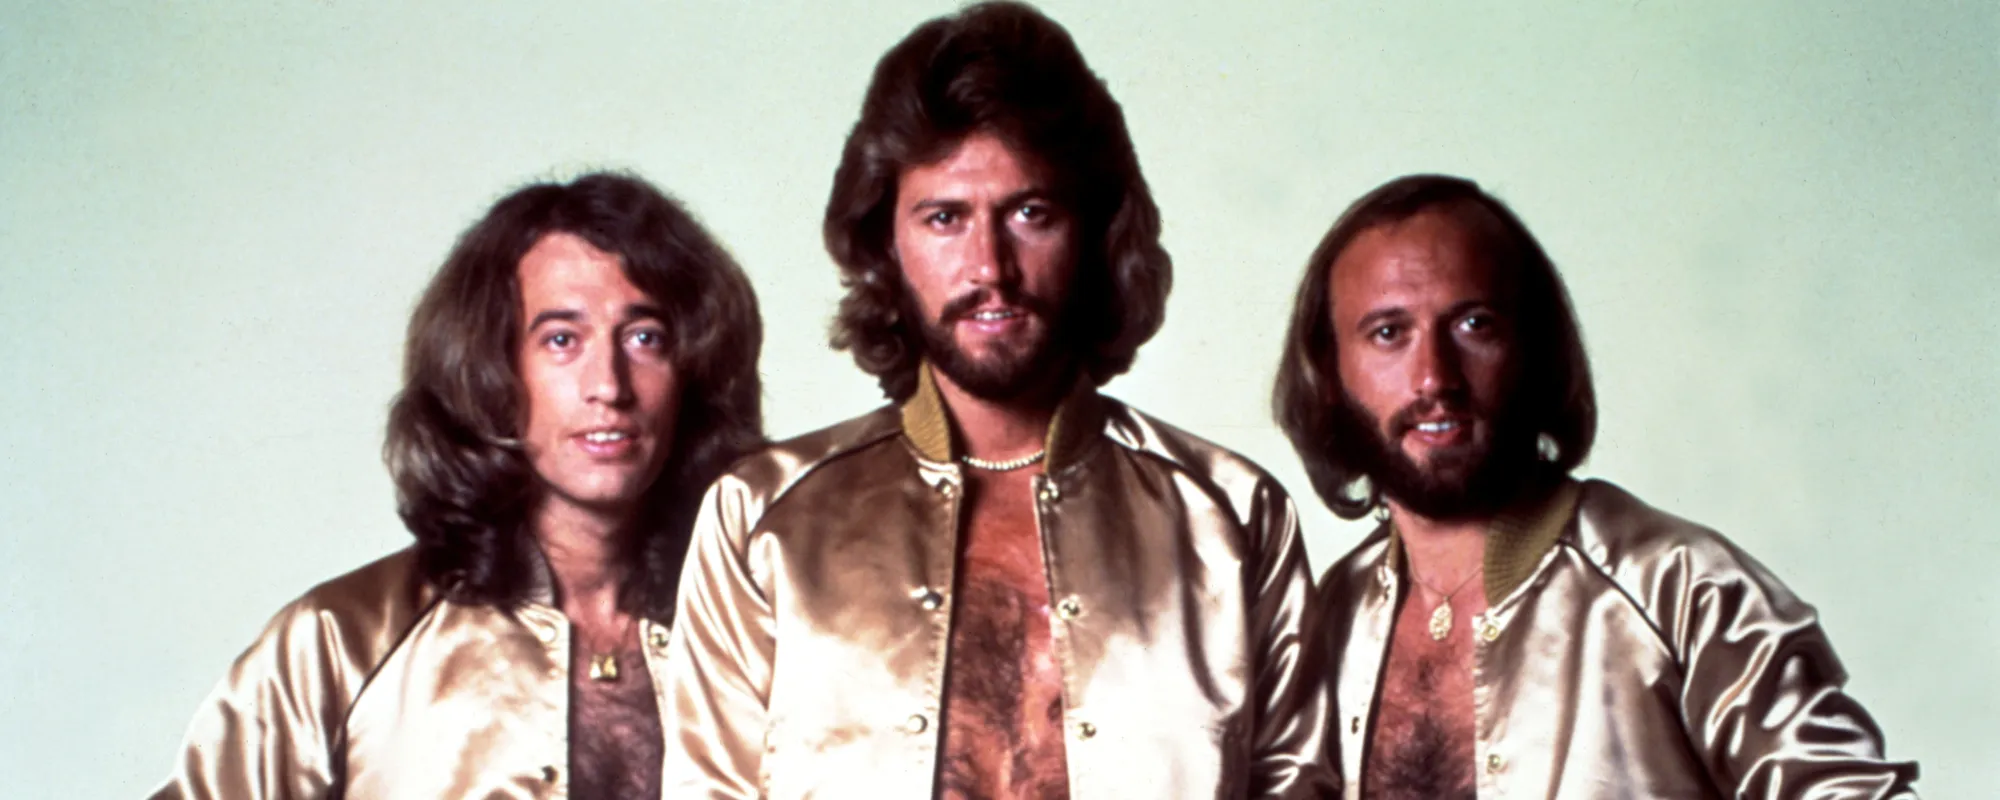 ‘Tribal Rights of the New Saturday Night’: The Story Behind “How Deep Is Your Love” by the Bee Gees